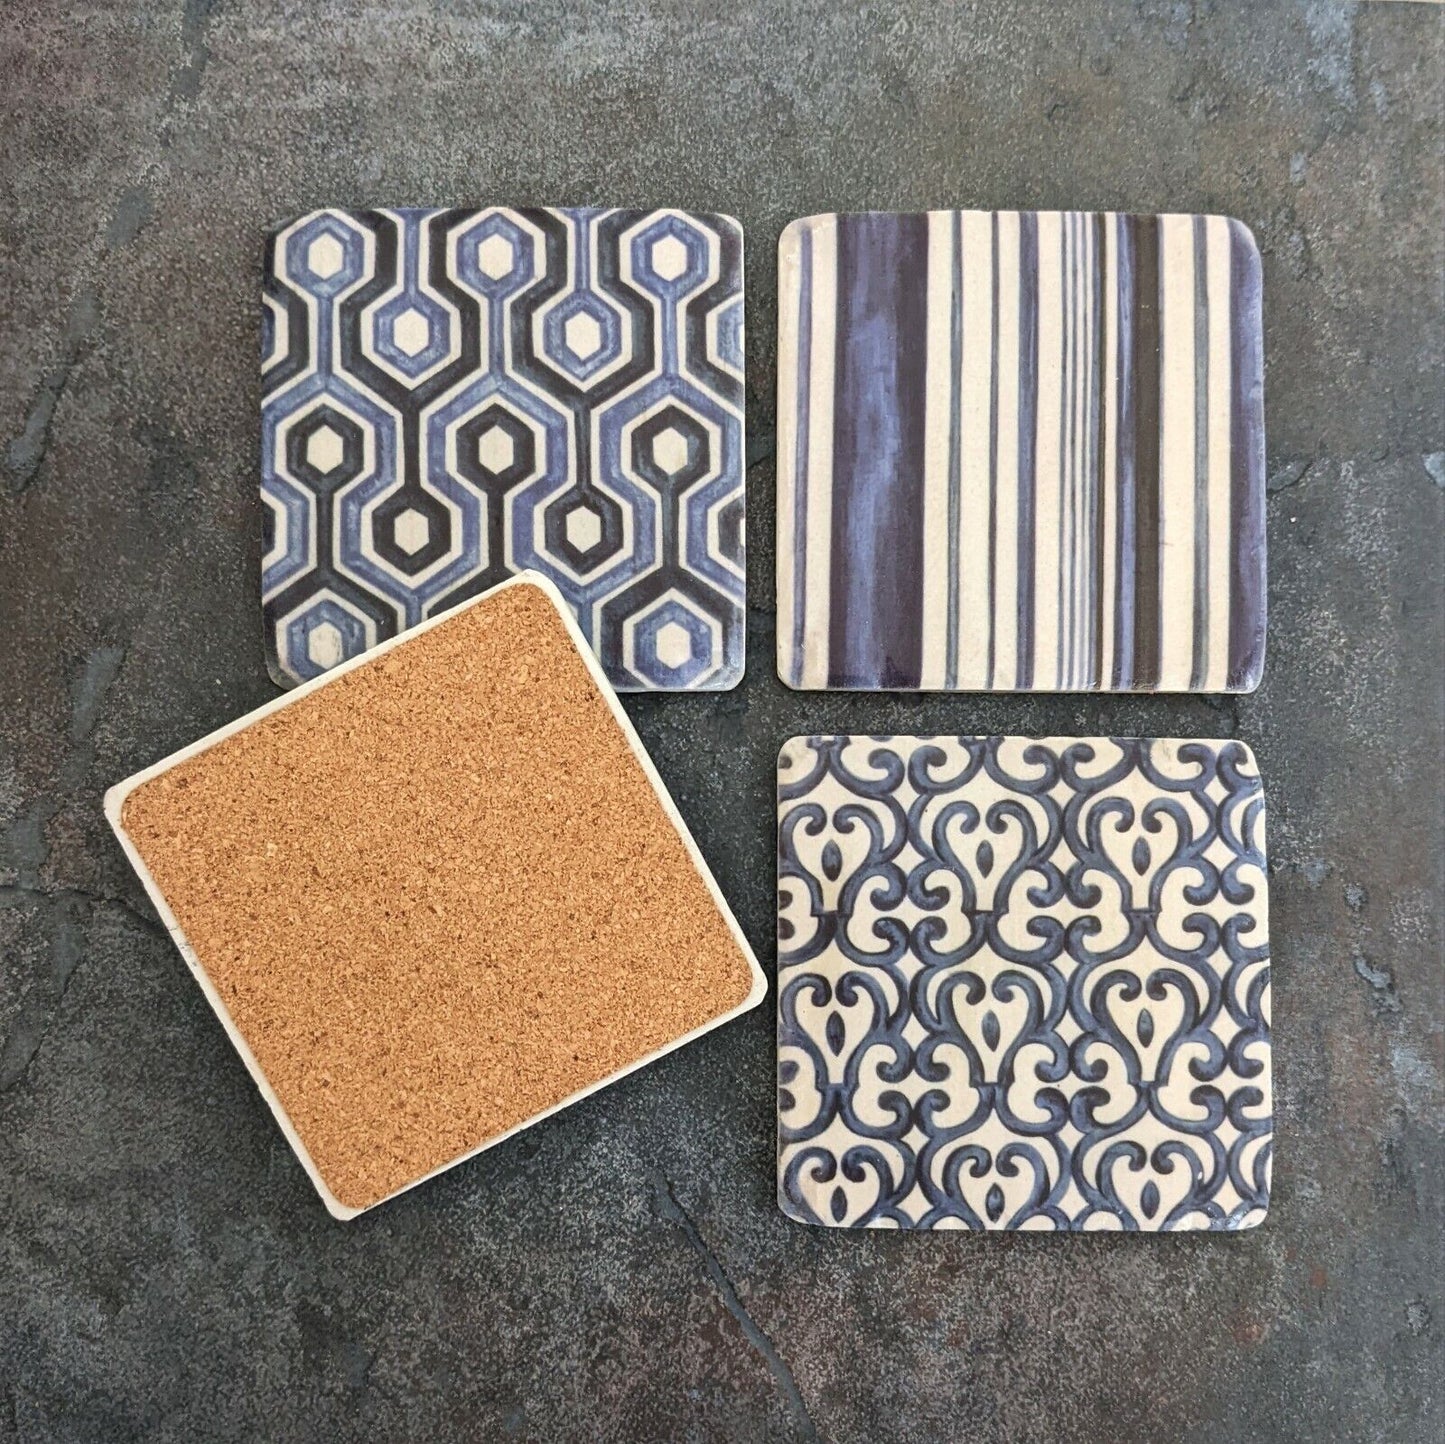 Ceramic Coasters Set of 4 Blue Geometric Willow Cork Backed Coasters Table Mats